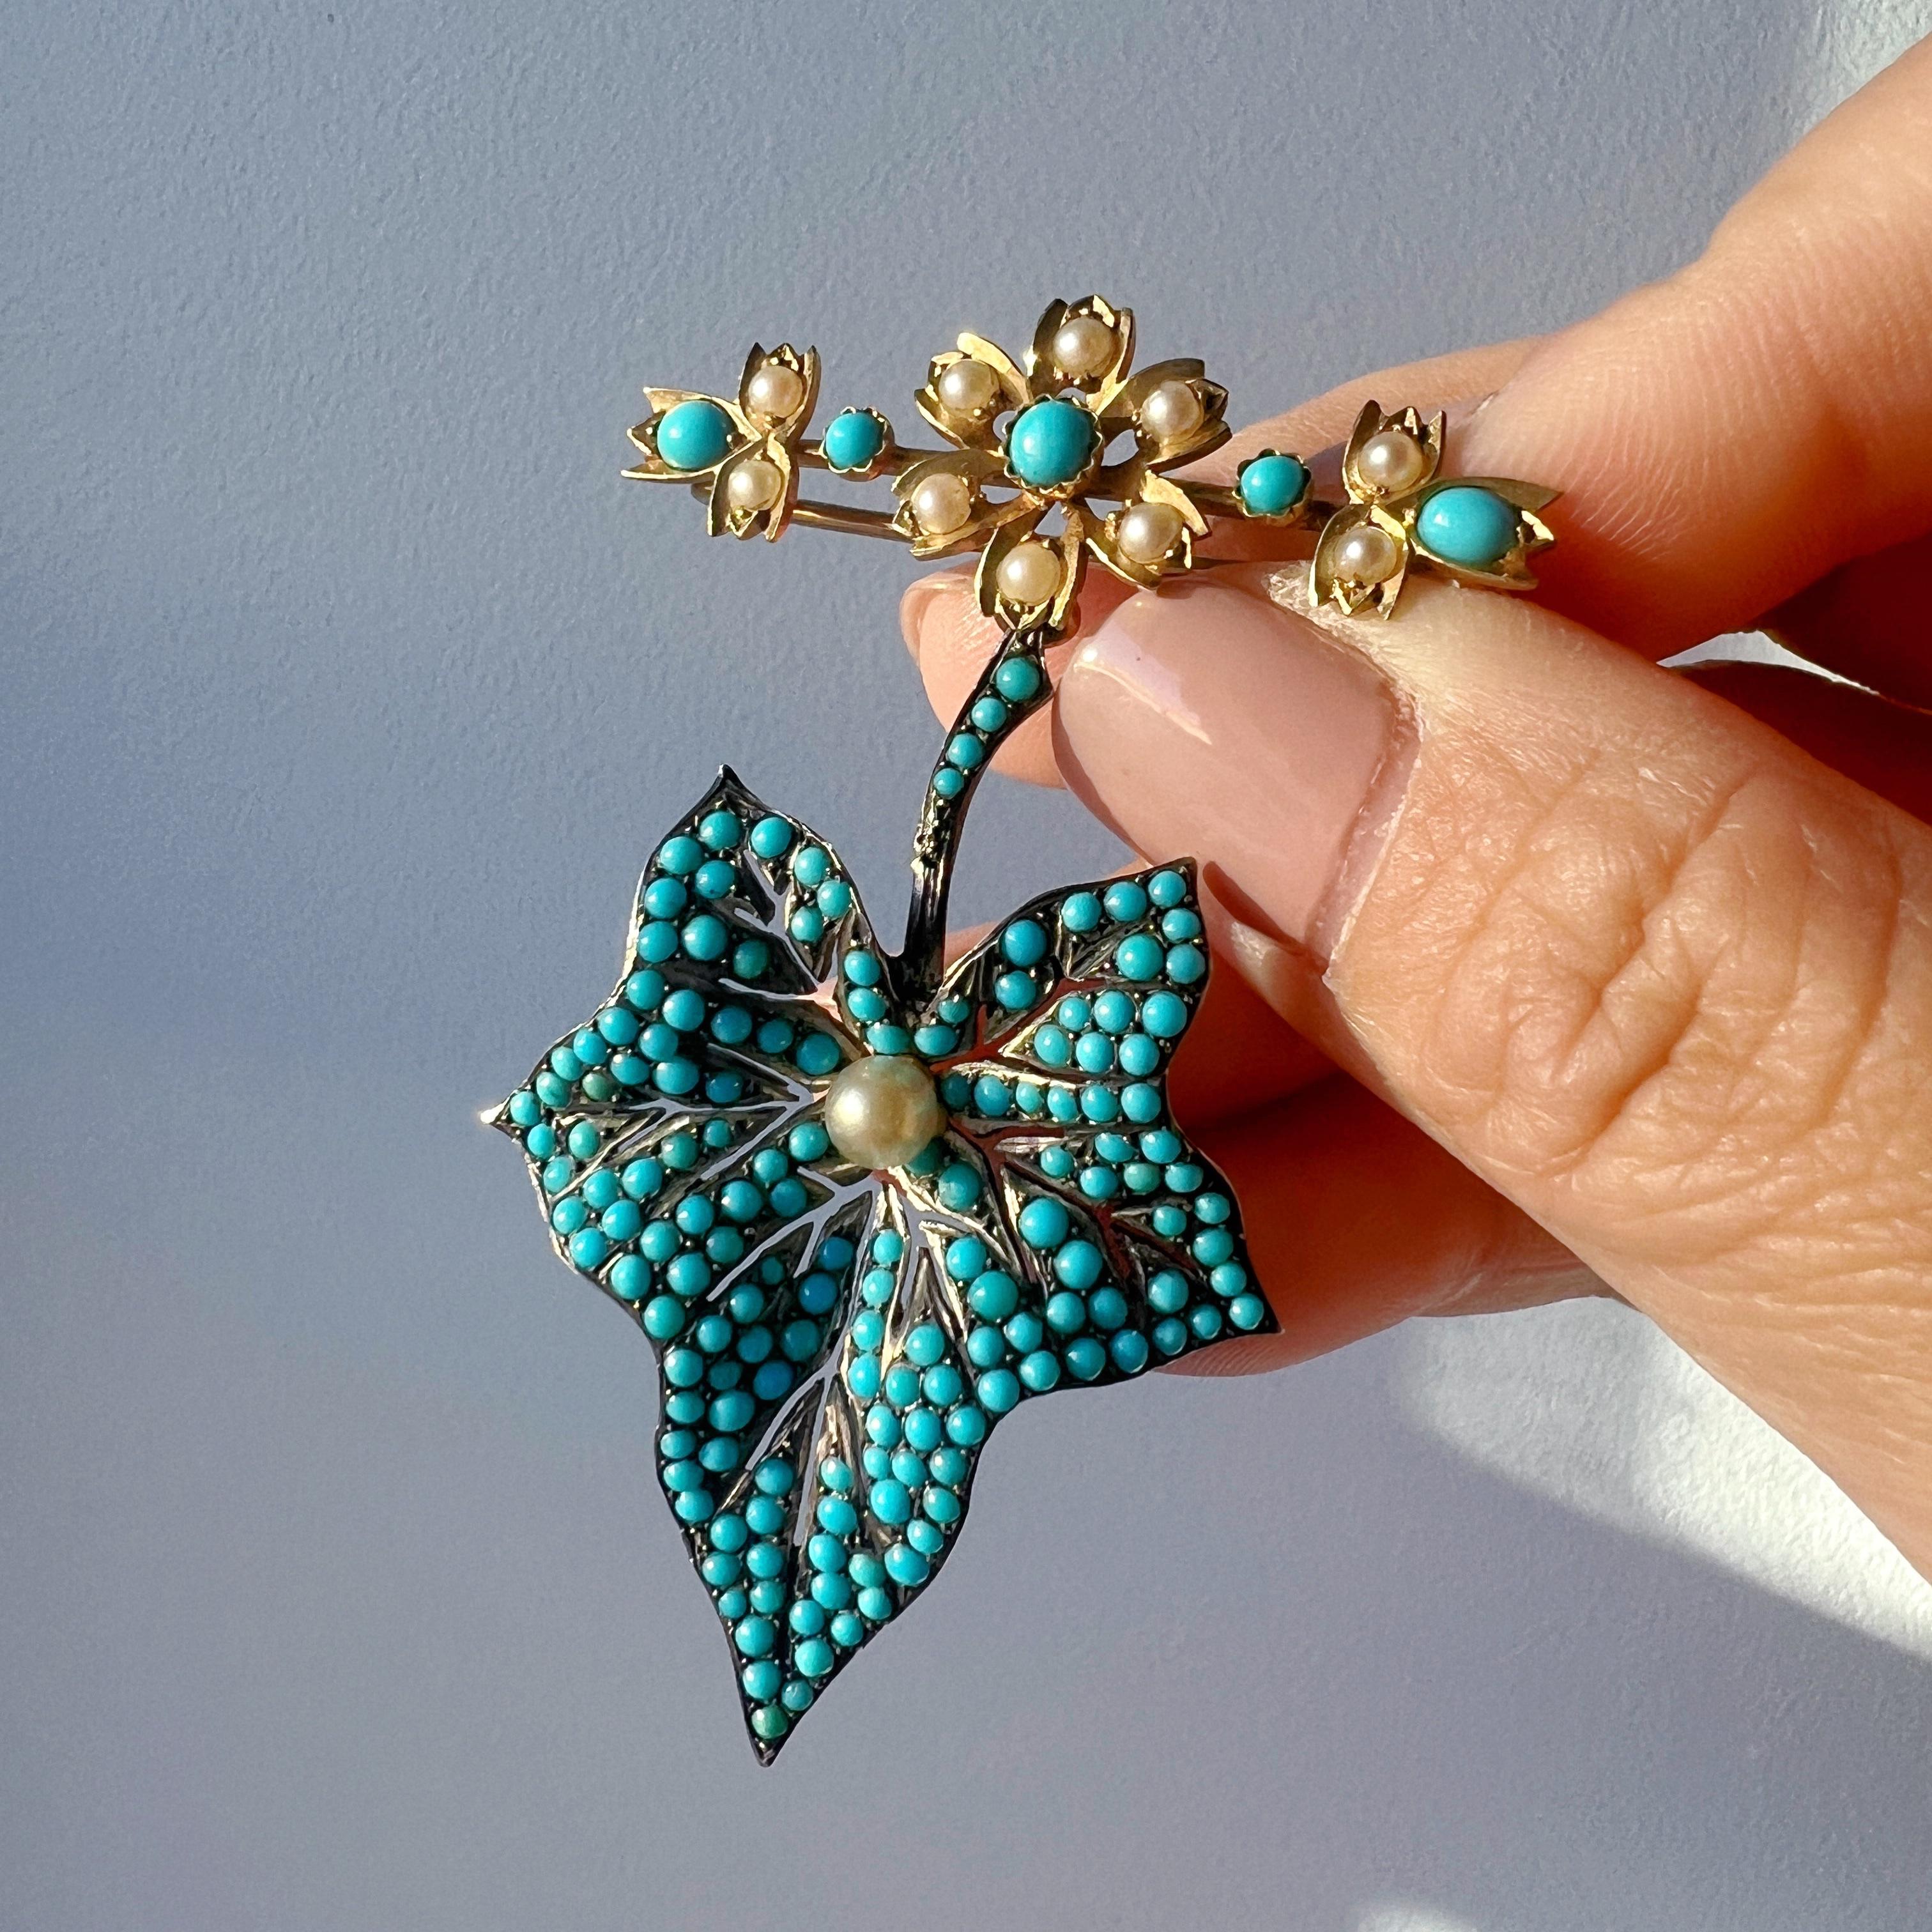 For sale an exquisite Victorian era brooch featuring a large ivy leaf adorned with captivating turquoise beads, fully pave set to perfection. Nestled in the heart of the leaf is a lustrous, white round pearl. It makes a beautiful contrast and also